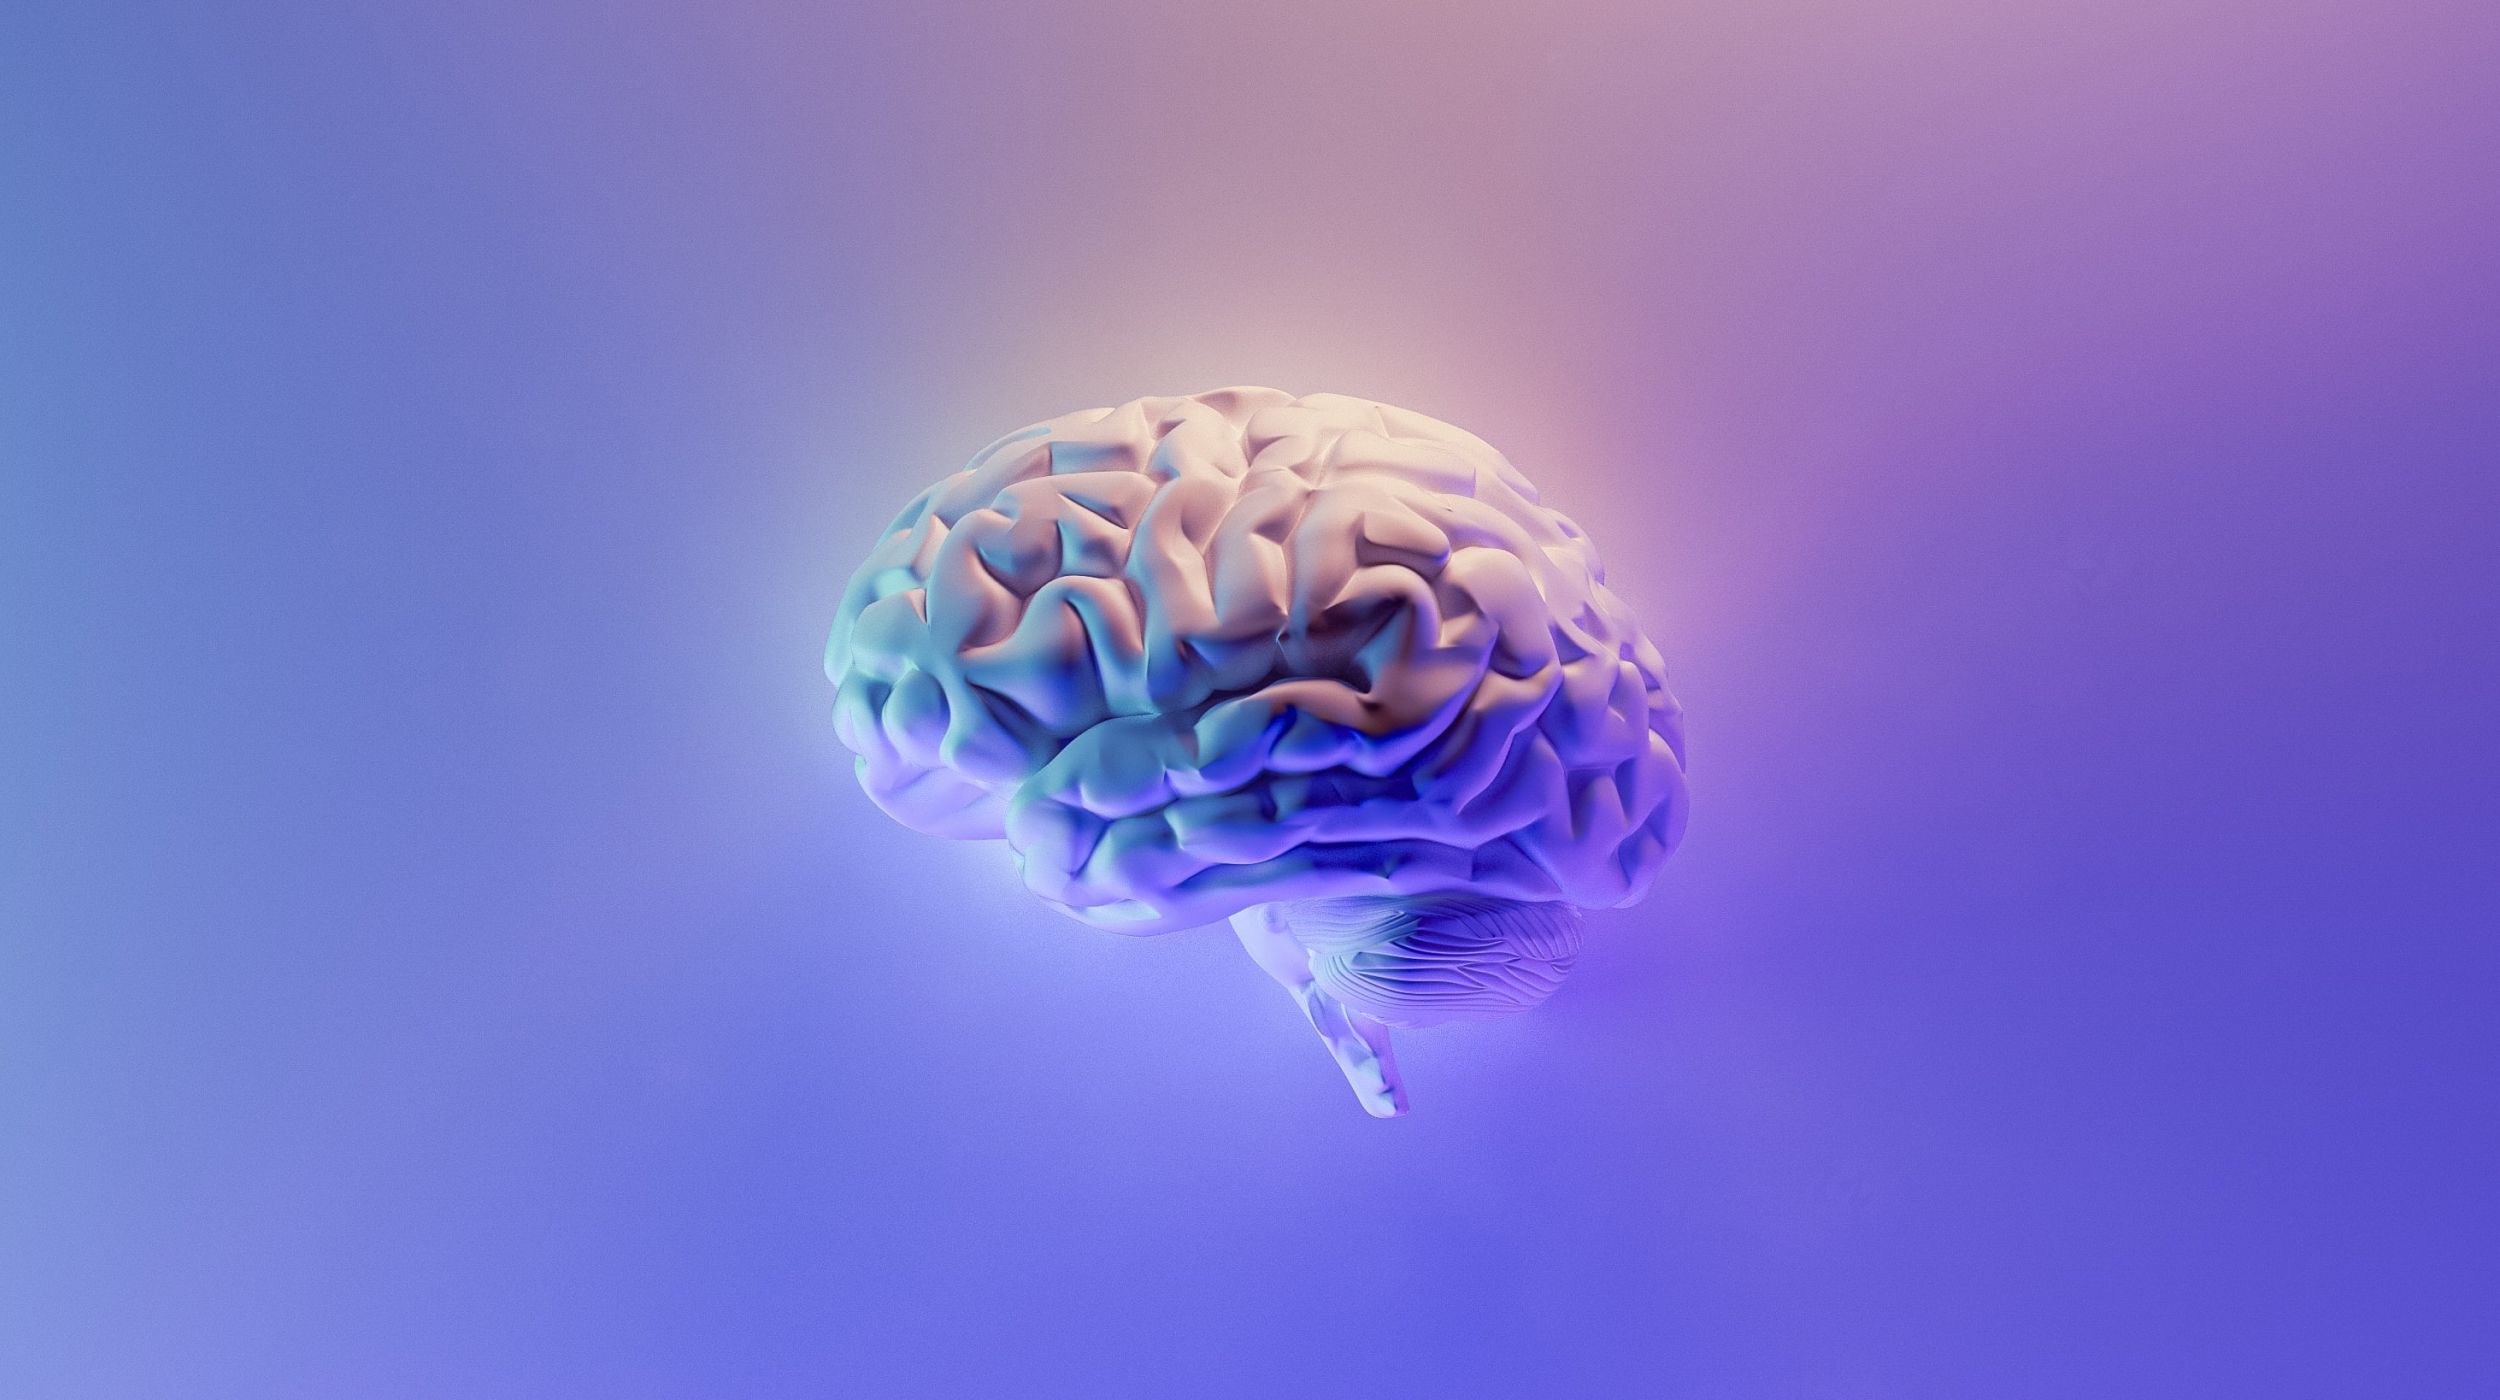 A 3d modelled human brain in the centre of a blue gradient background